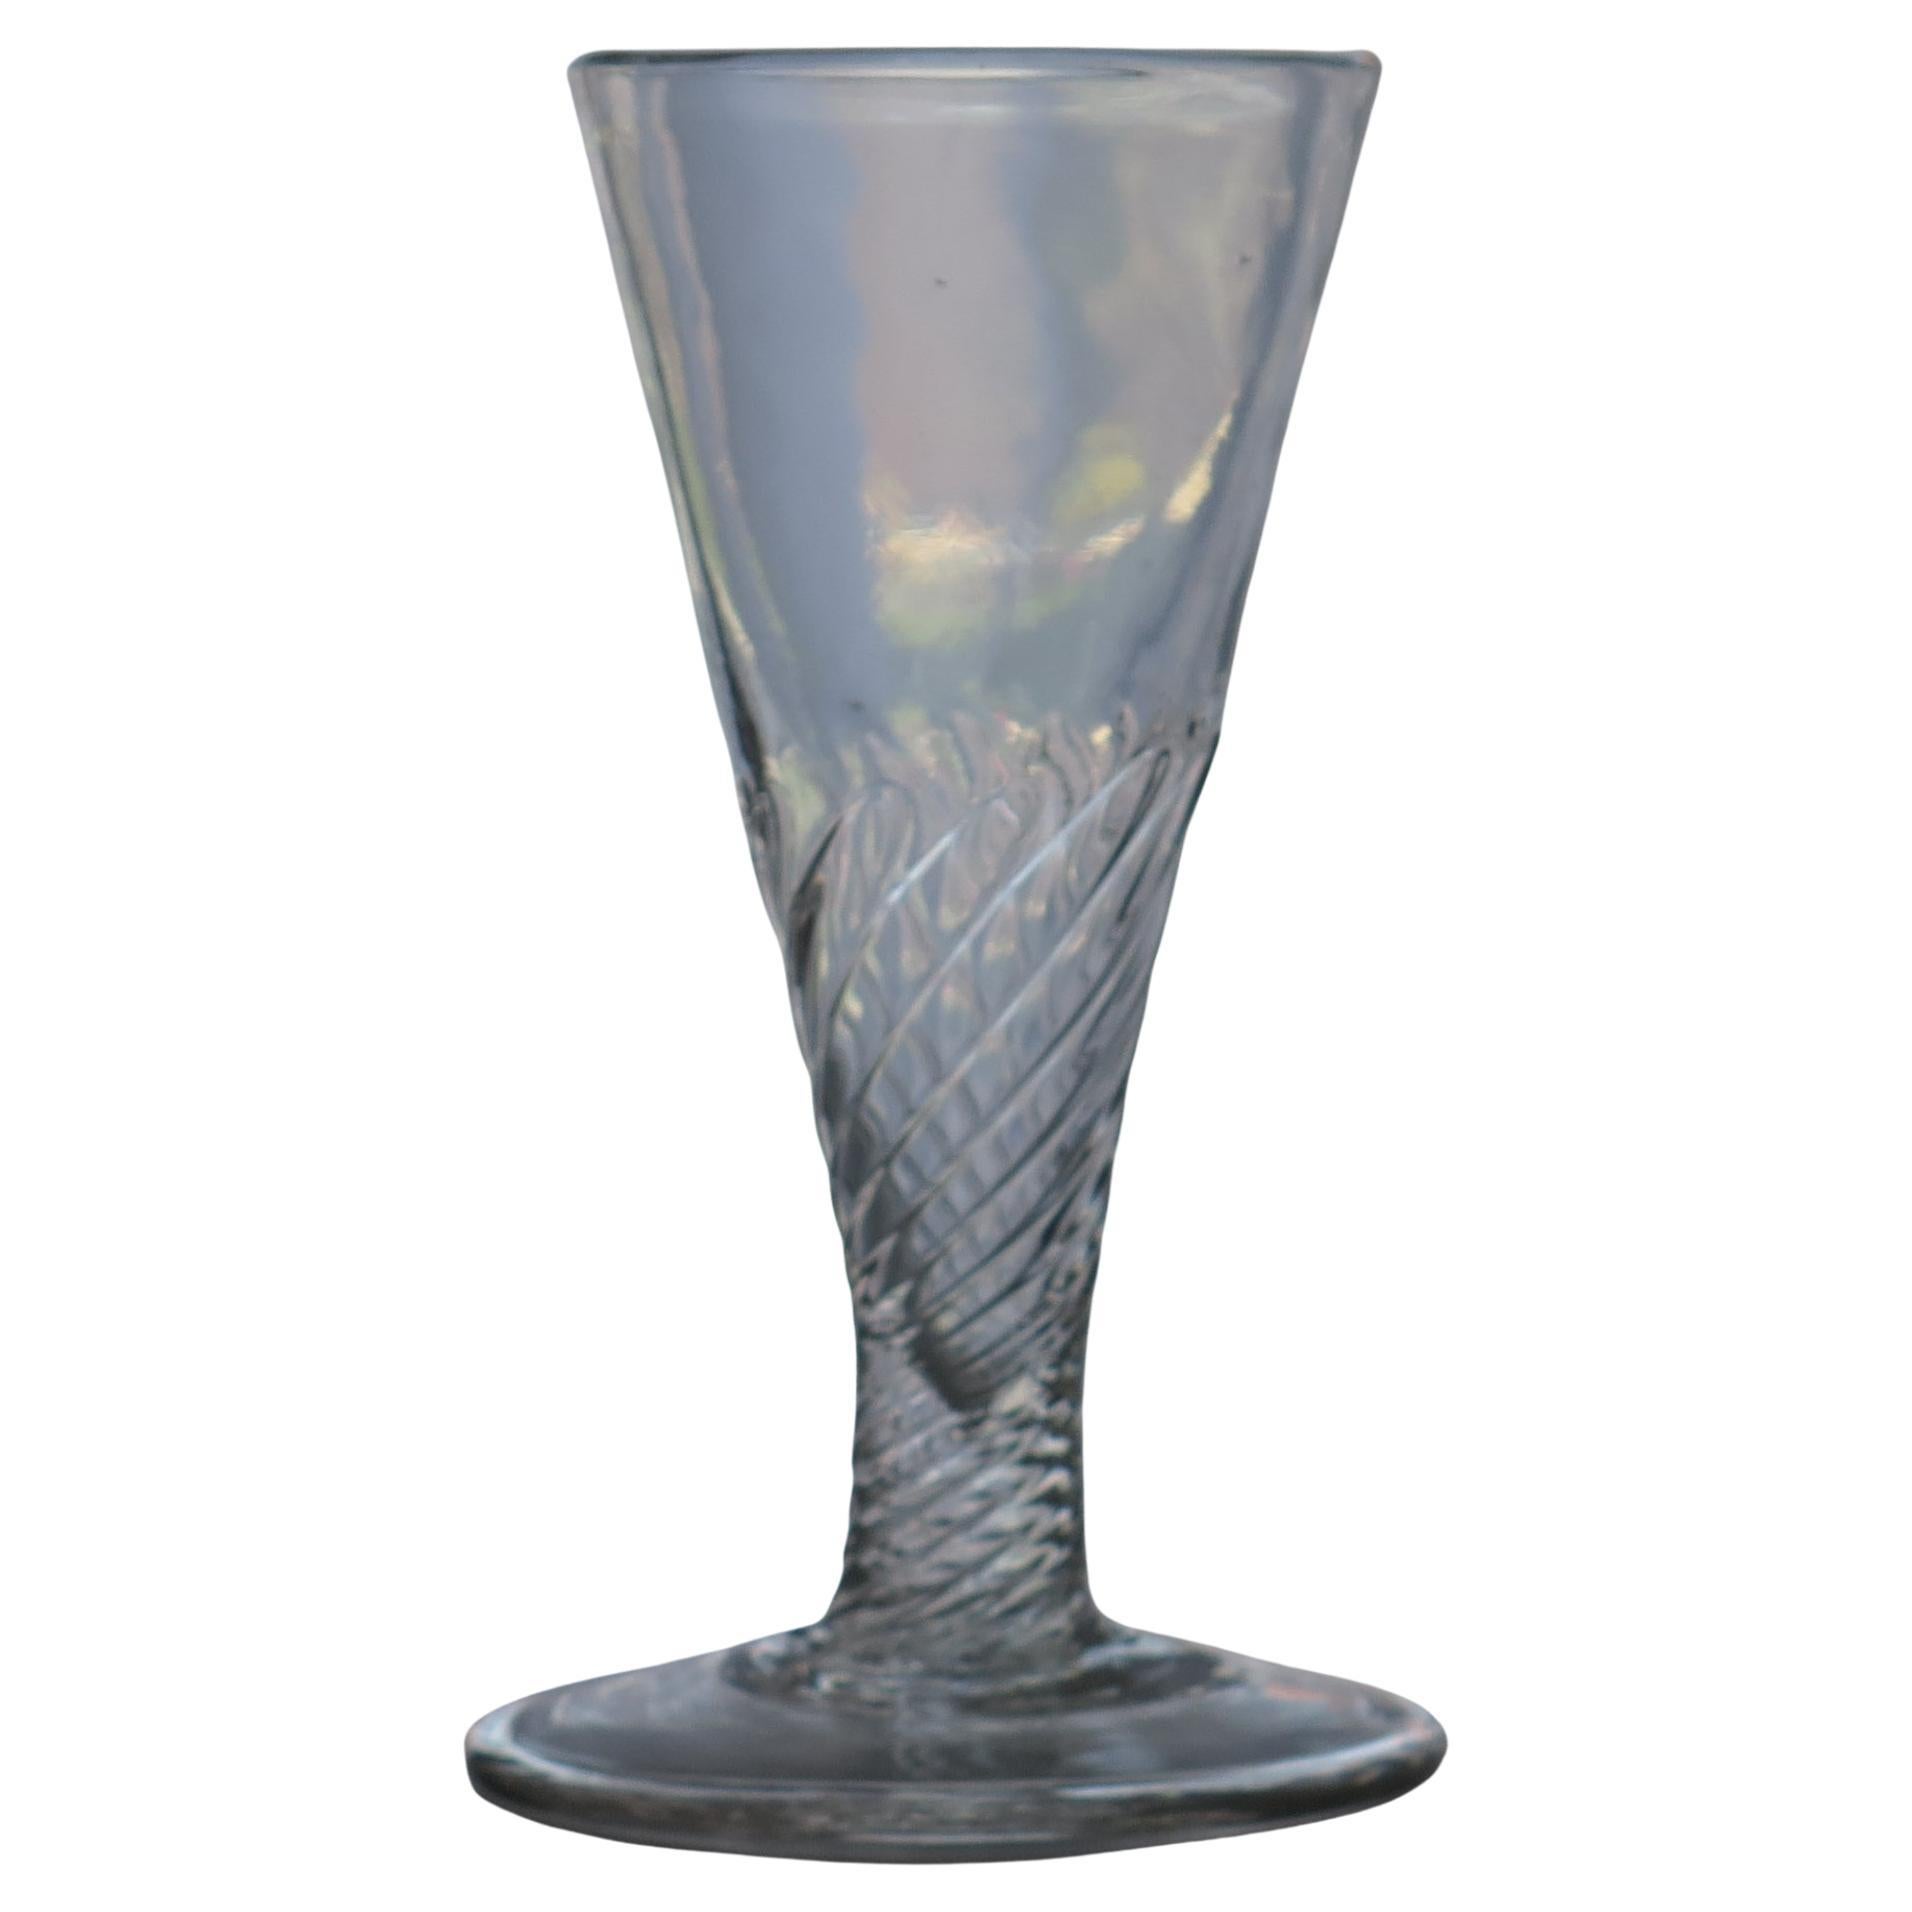 This is a good English, Georgian drinking glass, sometimes called a 